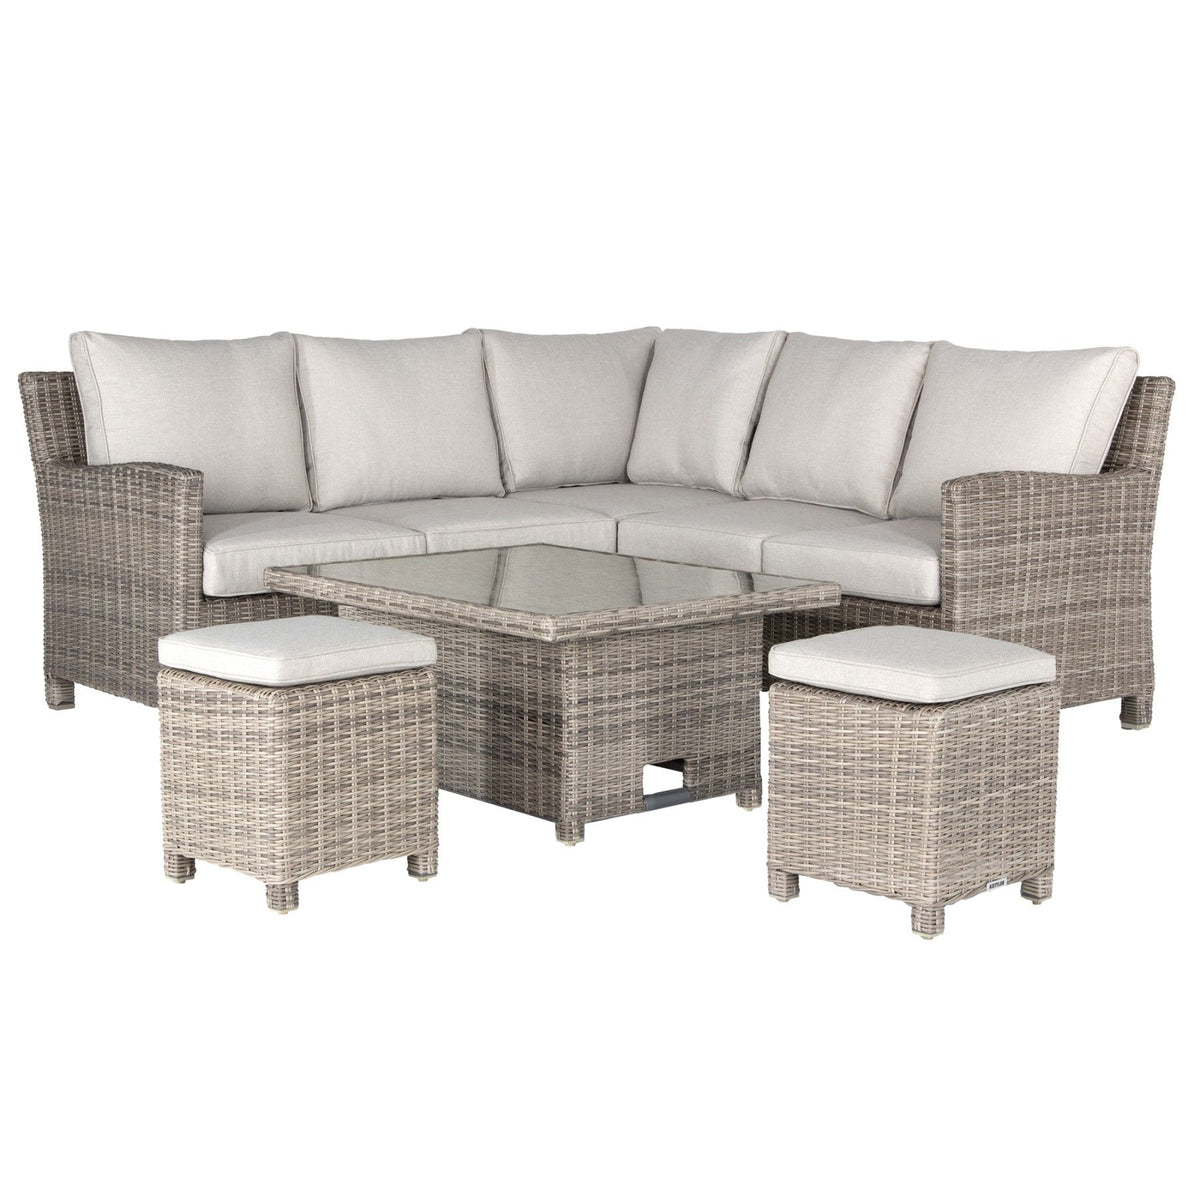 Kettler Palma Signature Mini Corner Oyster Wicker Outdoor Sofa Set with High Low Glass Top Table